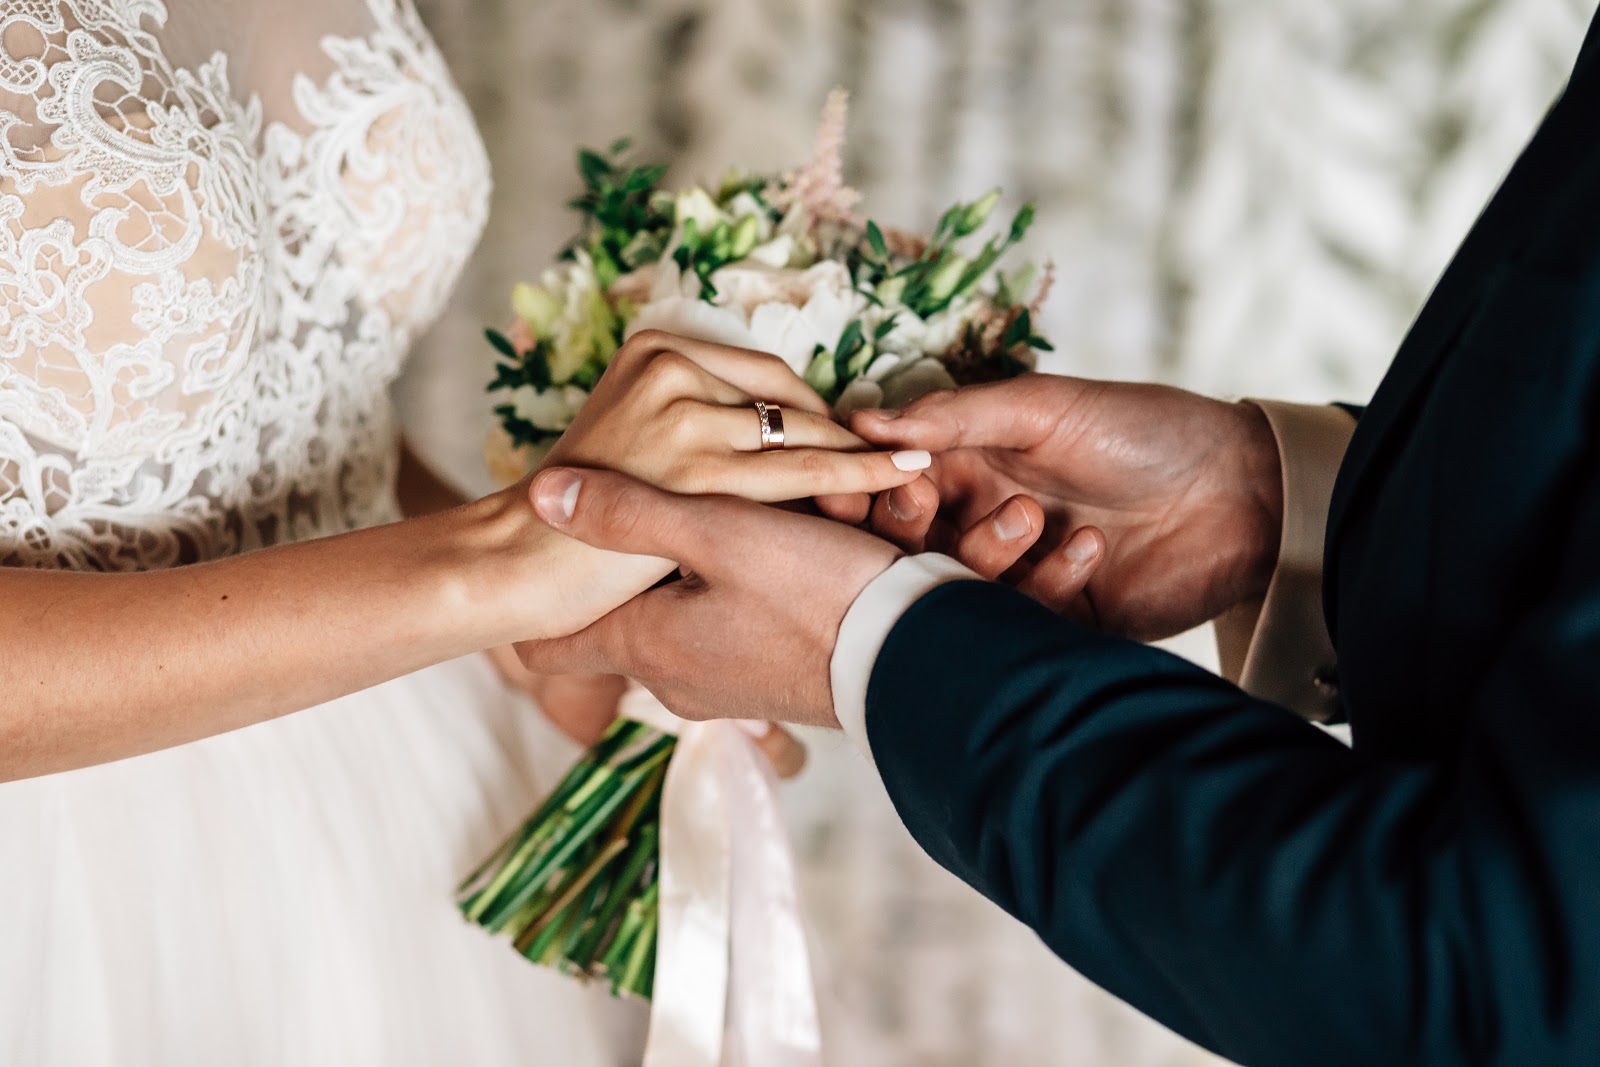 Ring exchange wording: A groom puts a ring on a bride's finger